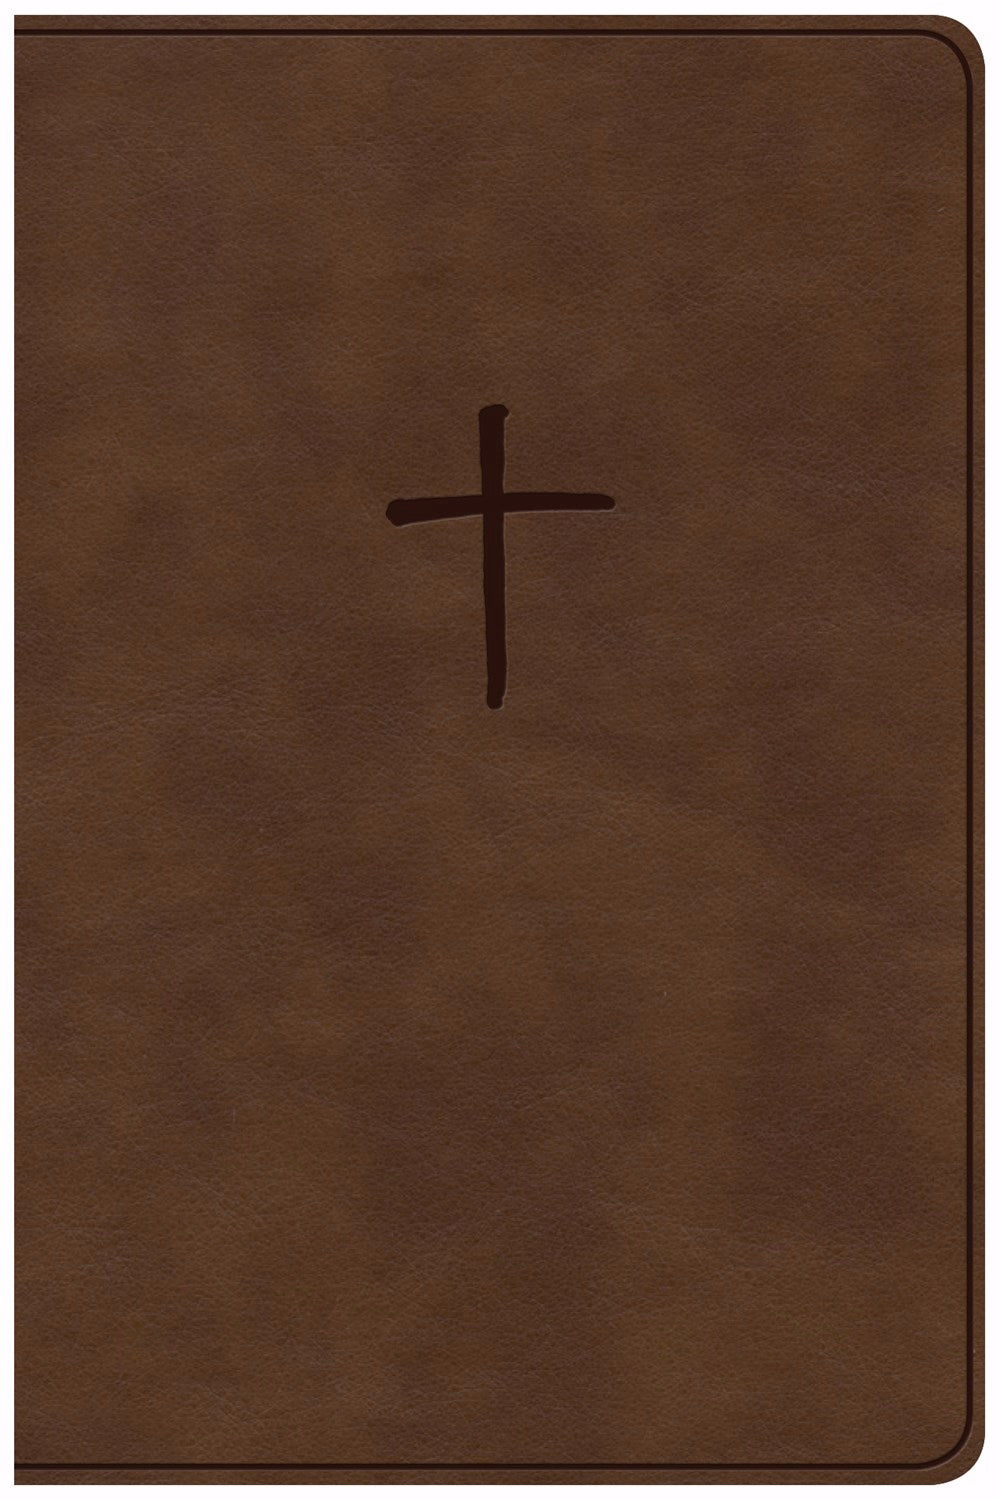 Image of CSB Compact Bible, Brown, Imitation Leather, Two-Column Text, Topical Subheadings, Words of Christ in Red, Concordance, Presentation Page other